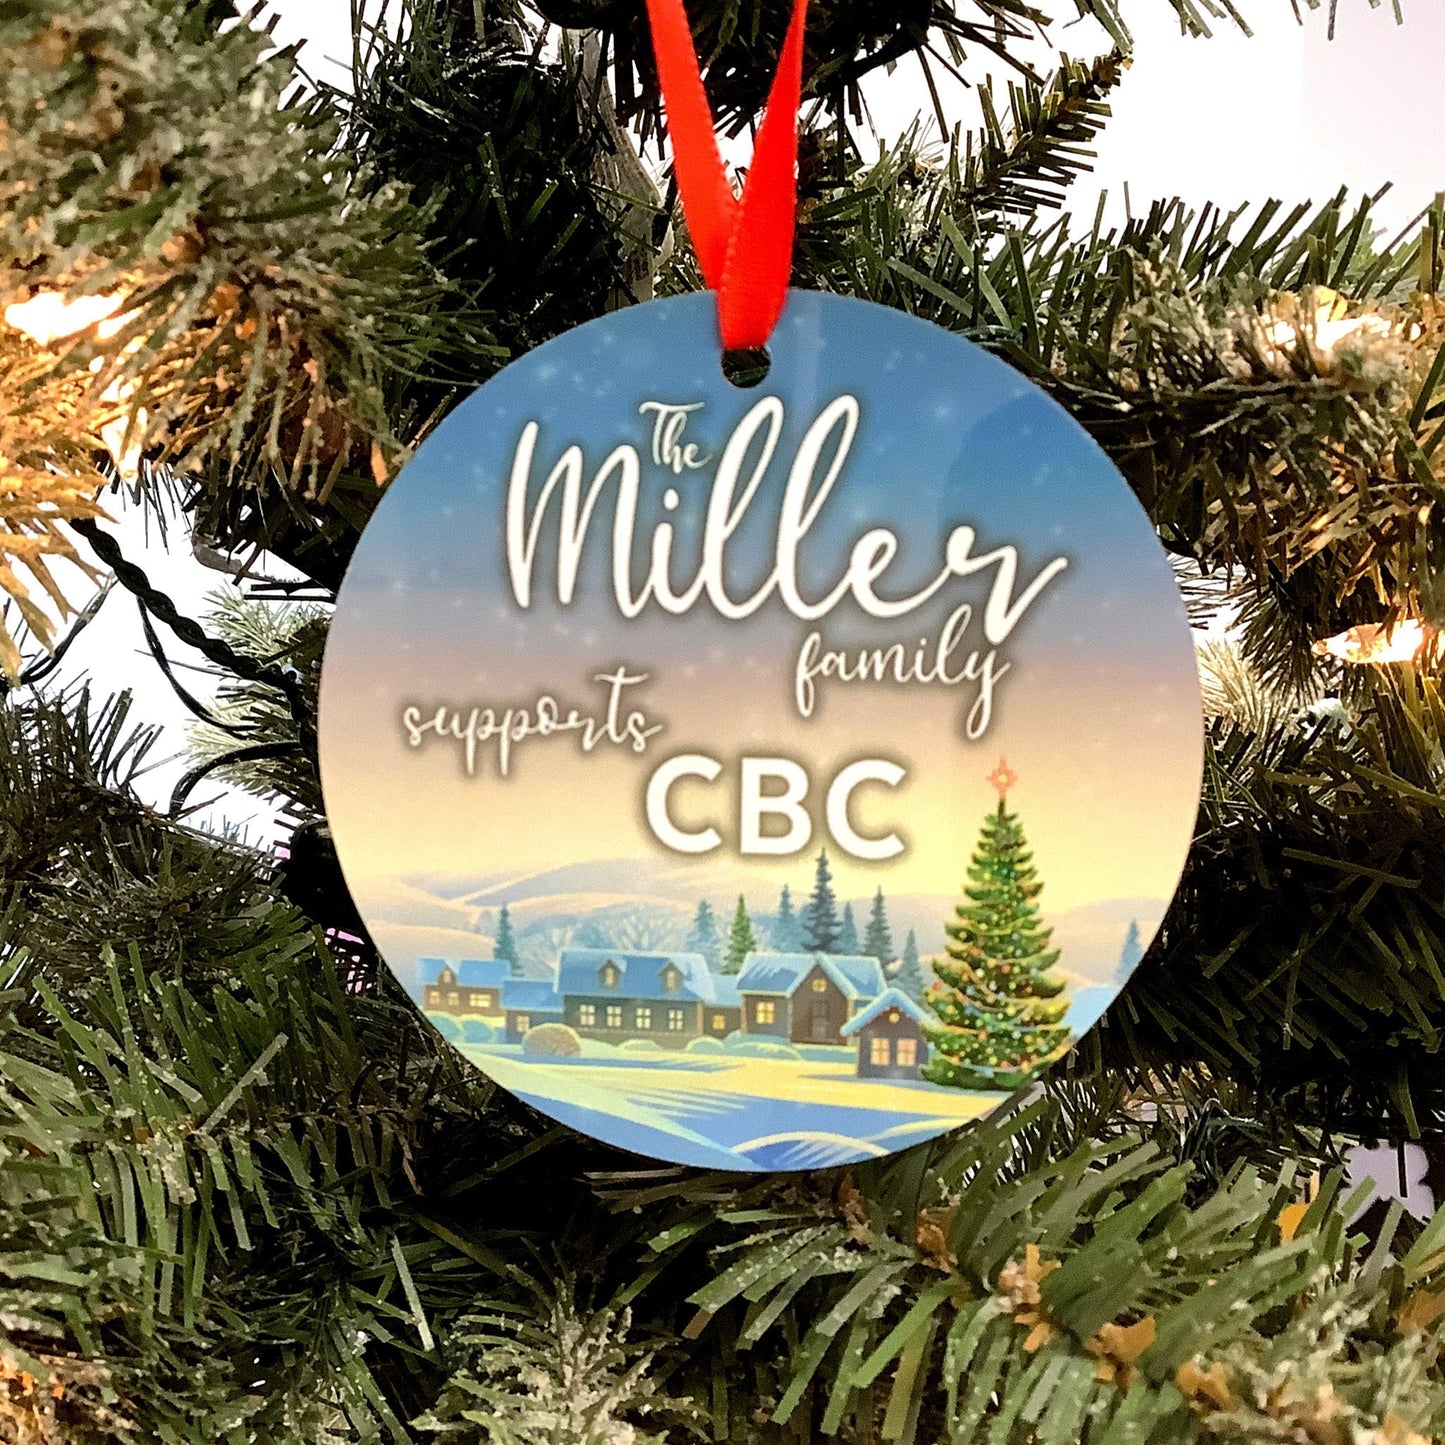 Personalized Aluminum Ornament Double Sided - CBC (1966-1974)